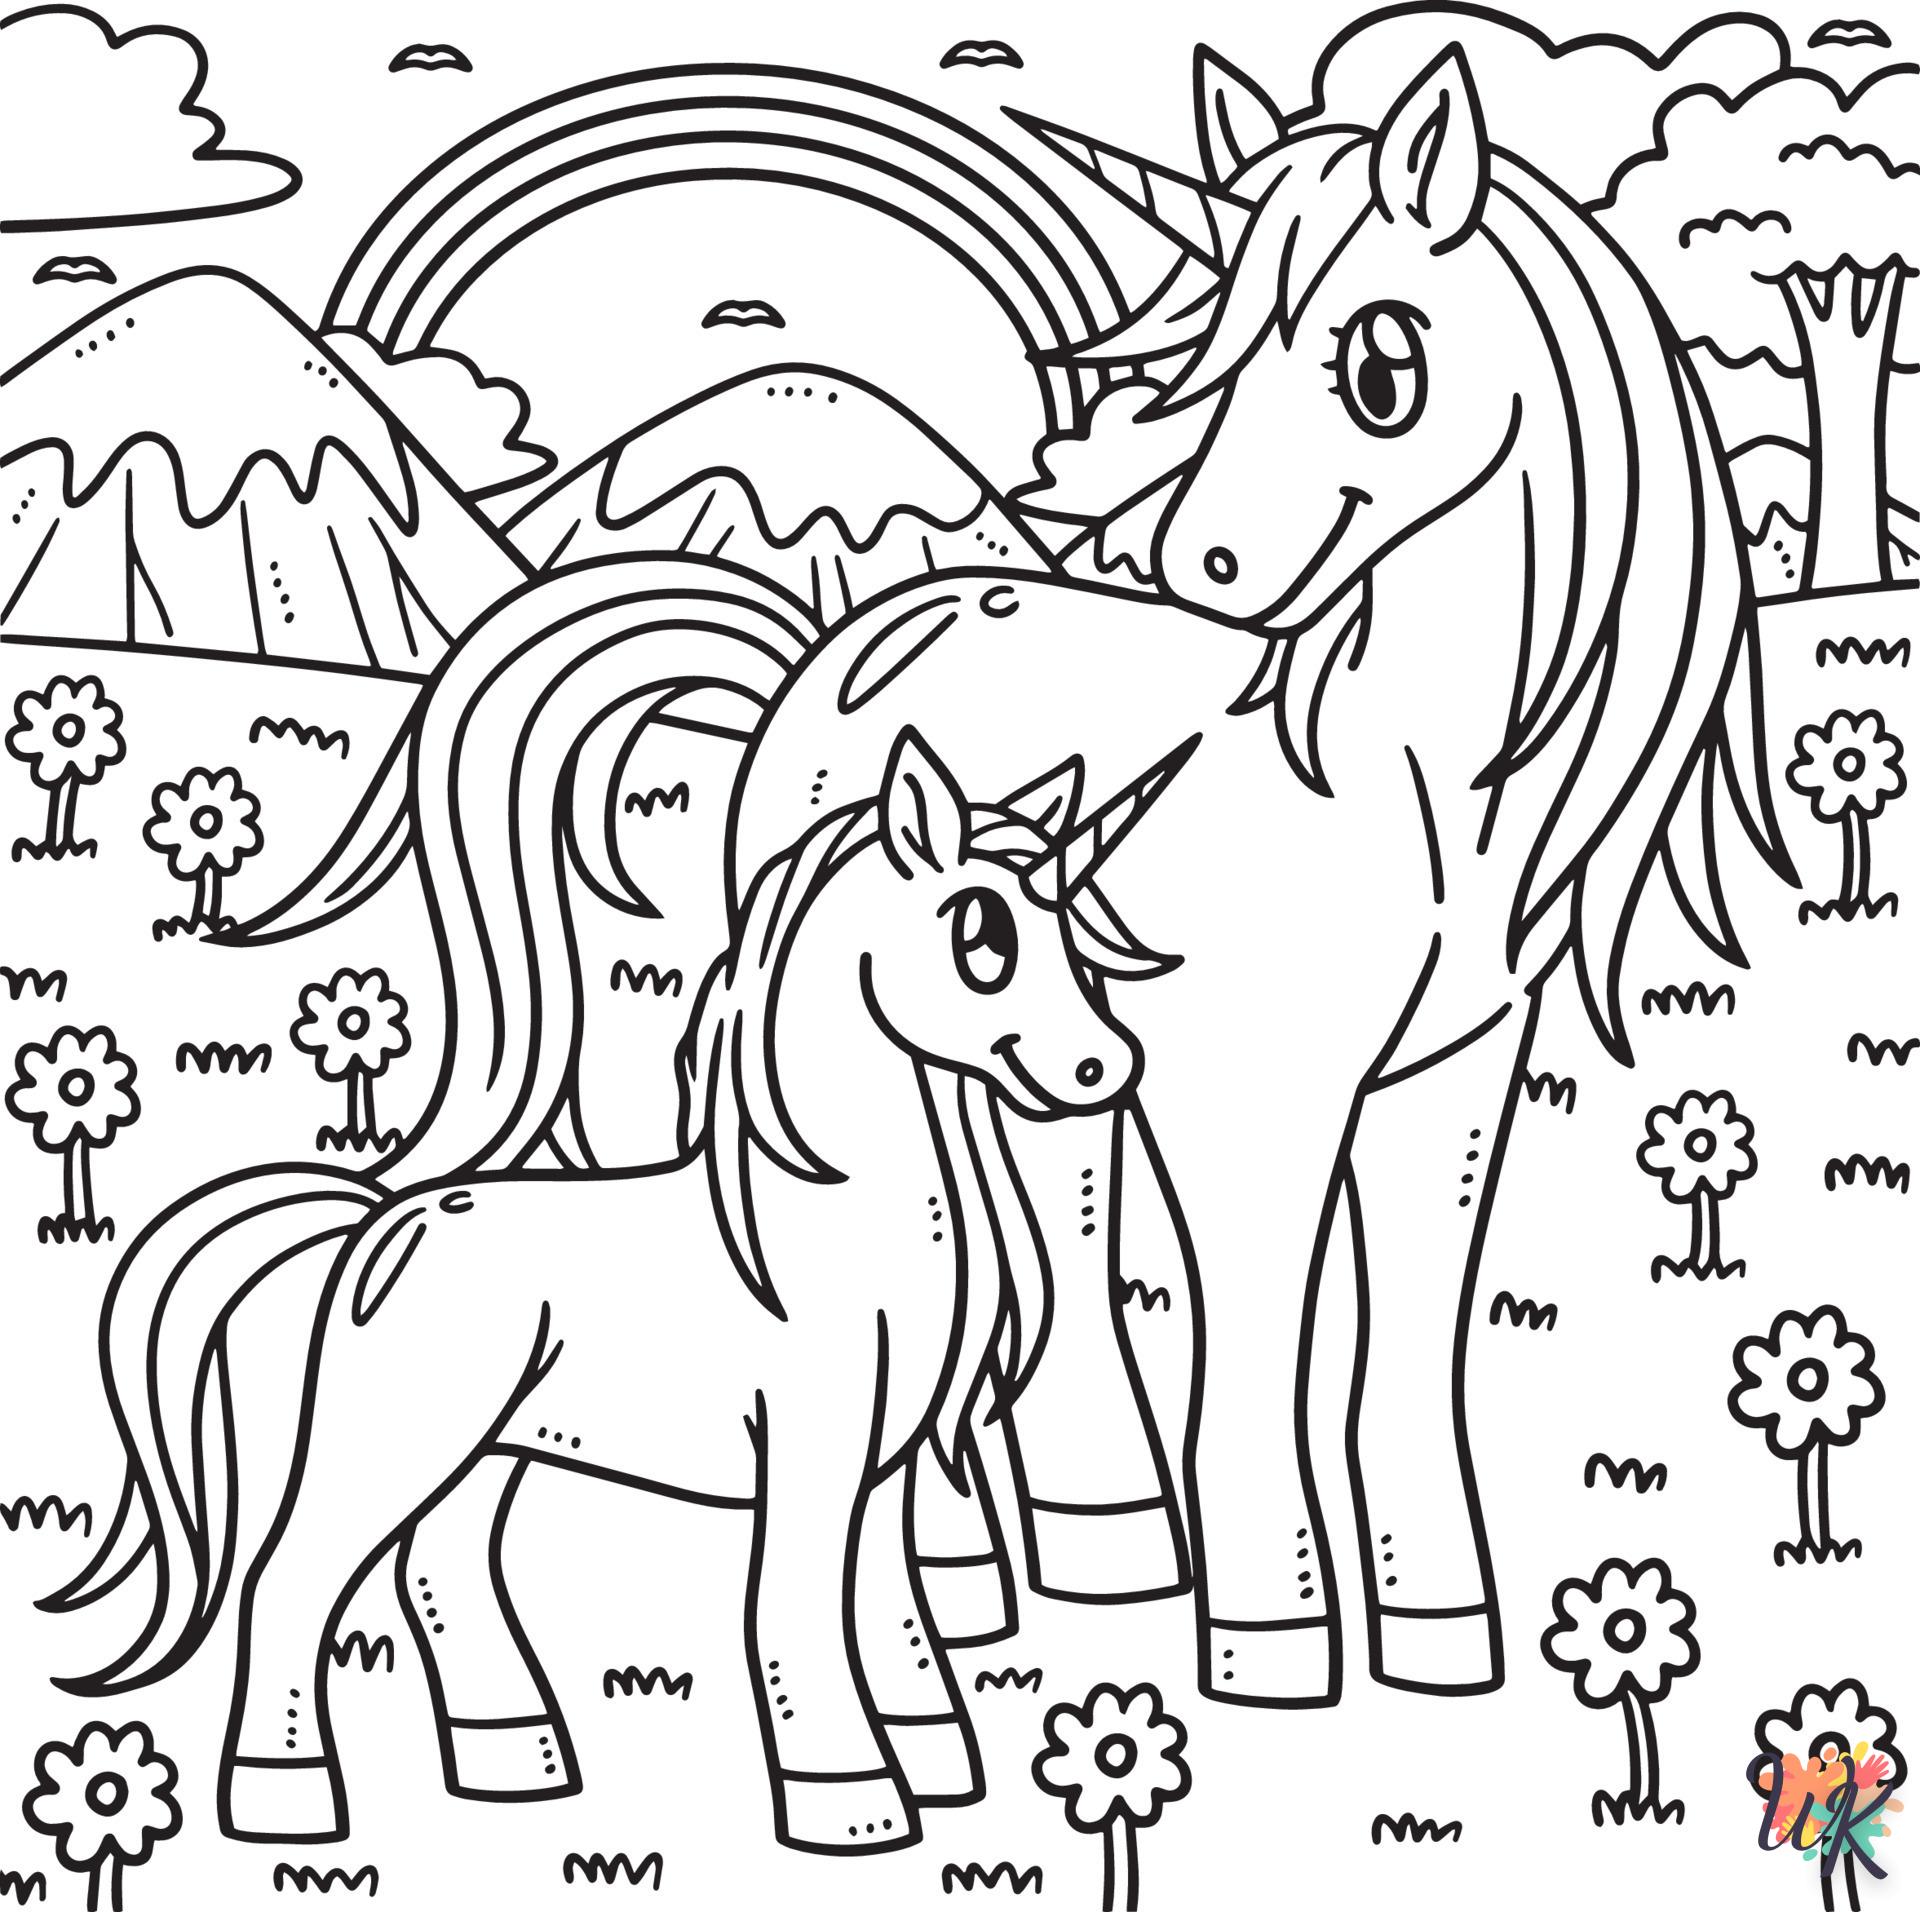 Unicorn coloring pages for adults easy